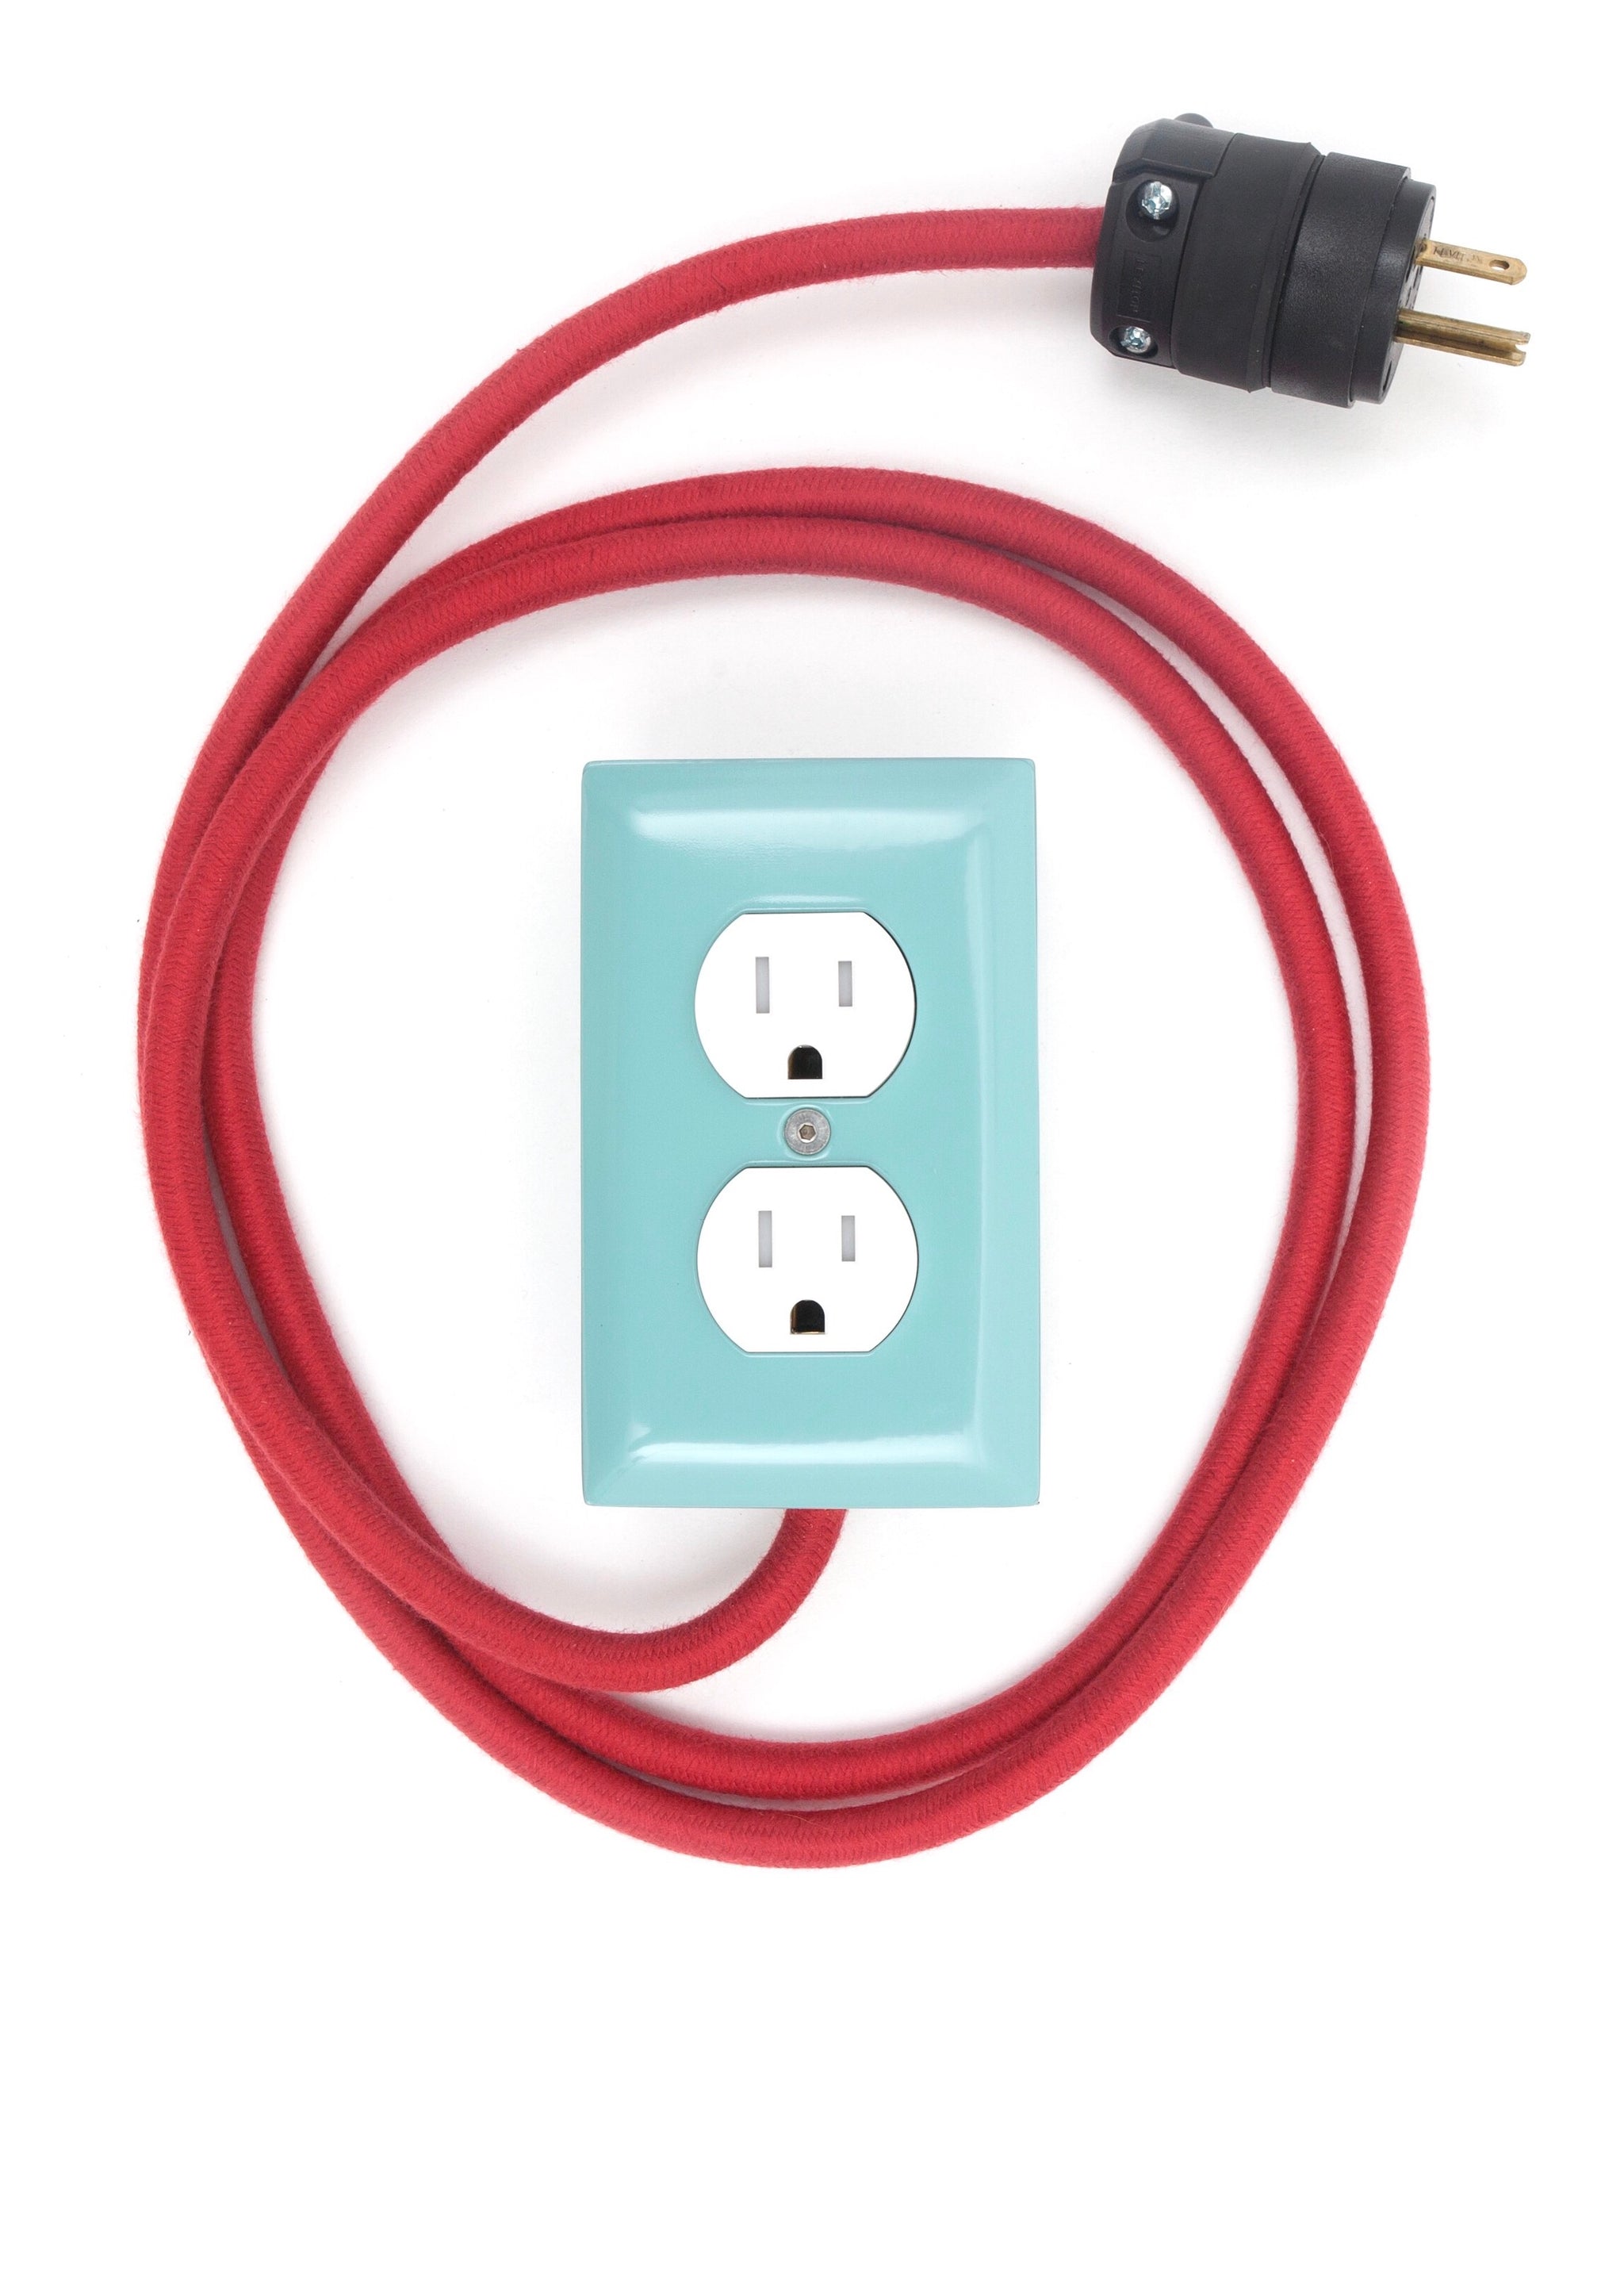 Exto Mint for CordPDX - A Modern Dual-Tamper-Resistant Outlet, 15-AMP Extension Cord